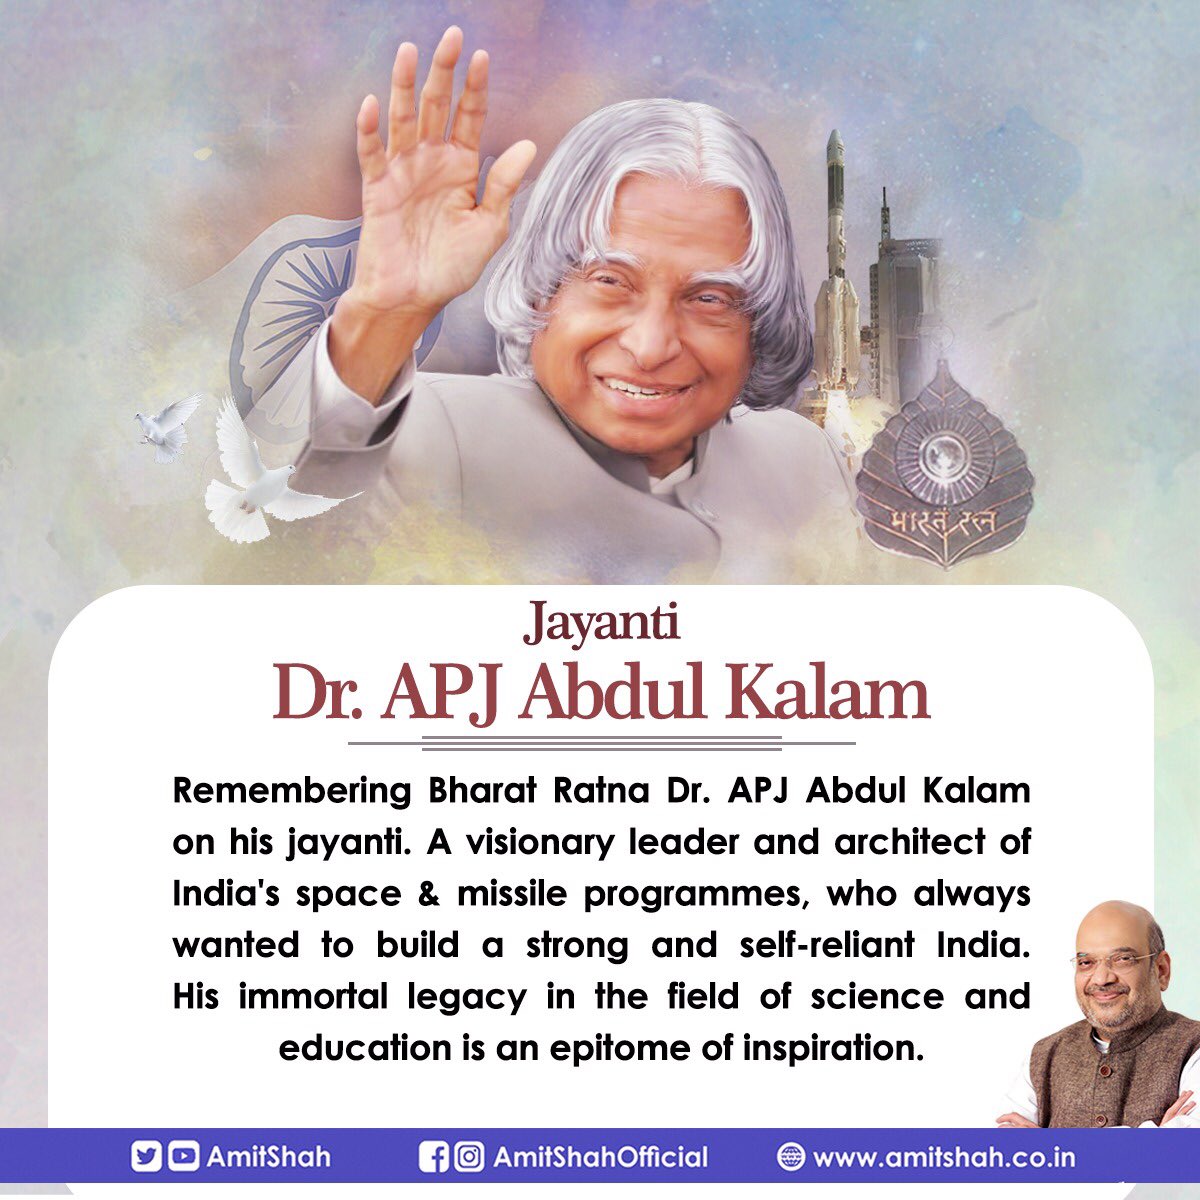 Remembering Bharat Ratna Dr. APJ Abdul Kalam on his jayanti. A visionary leader and architect of India's space & missile programmes, who always wanted to build a strong and self-reliant India. His immortal legacy in the field of science and education is an epitome of inspiration.